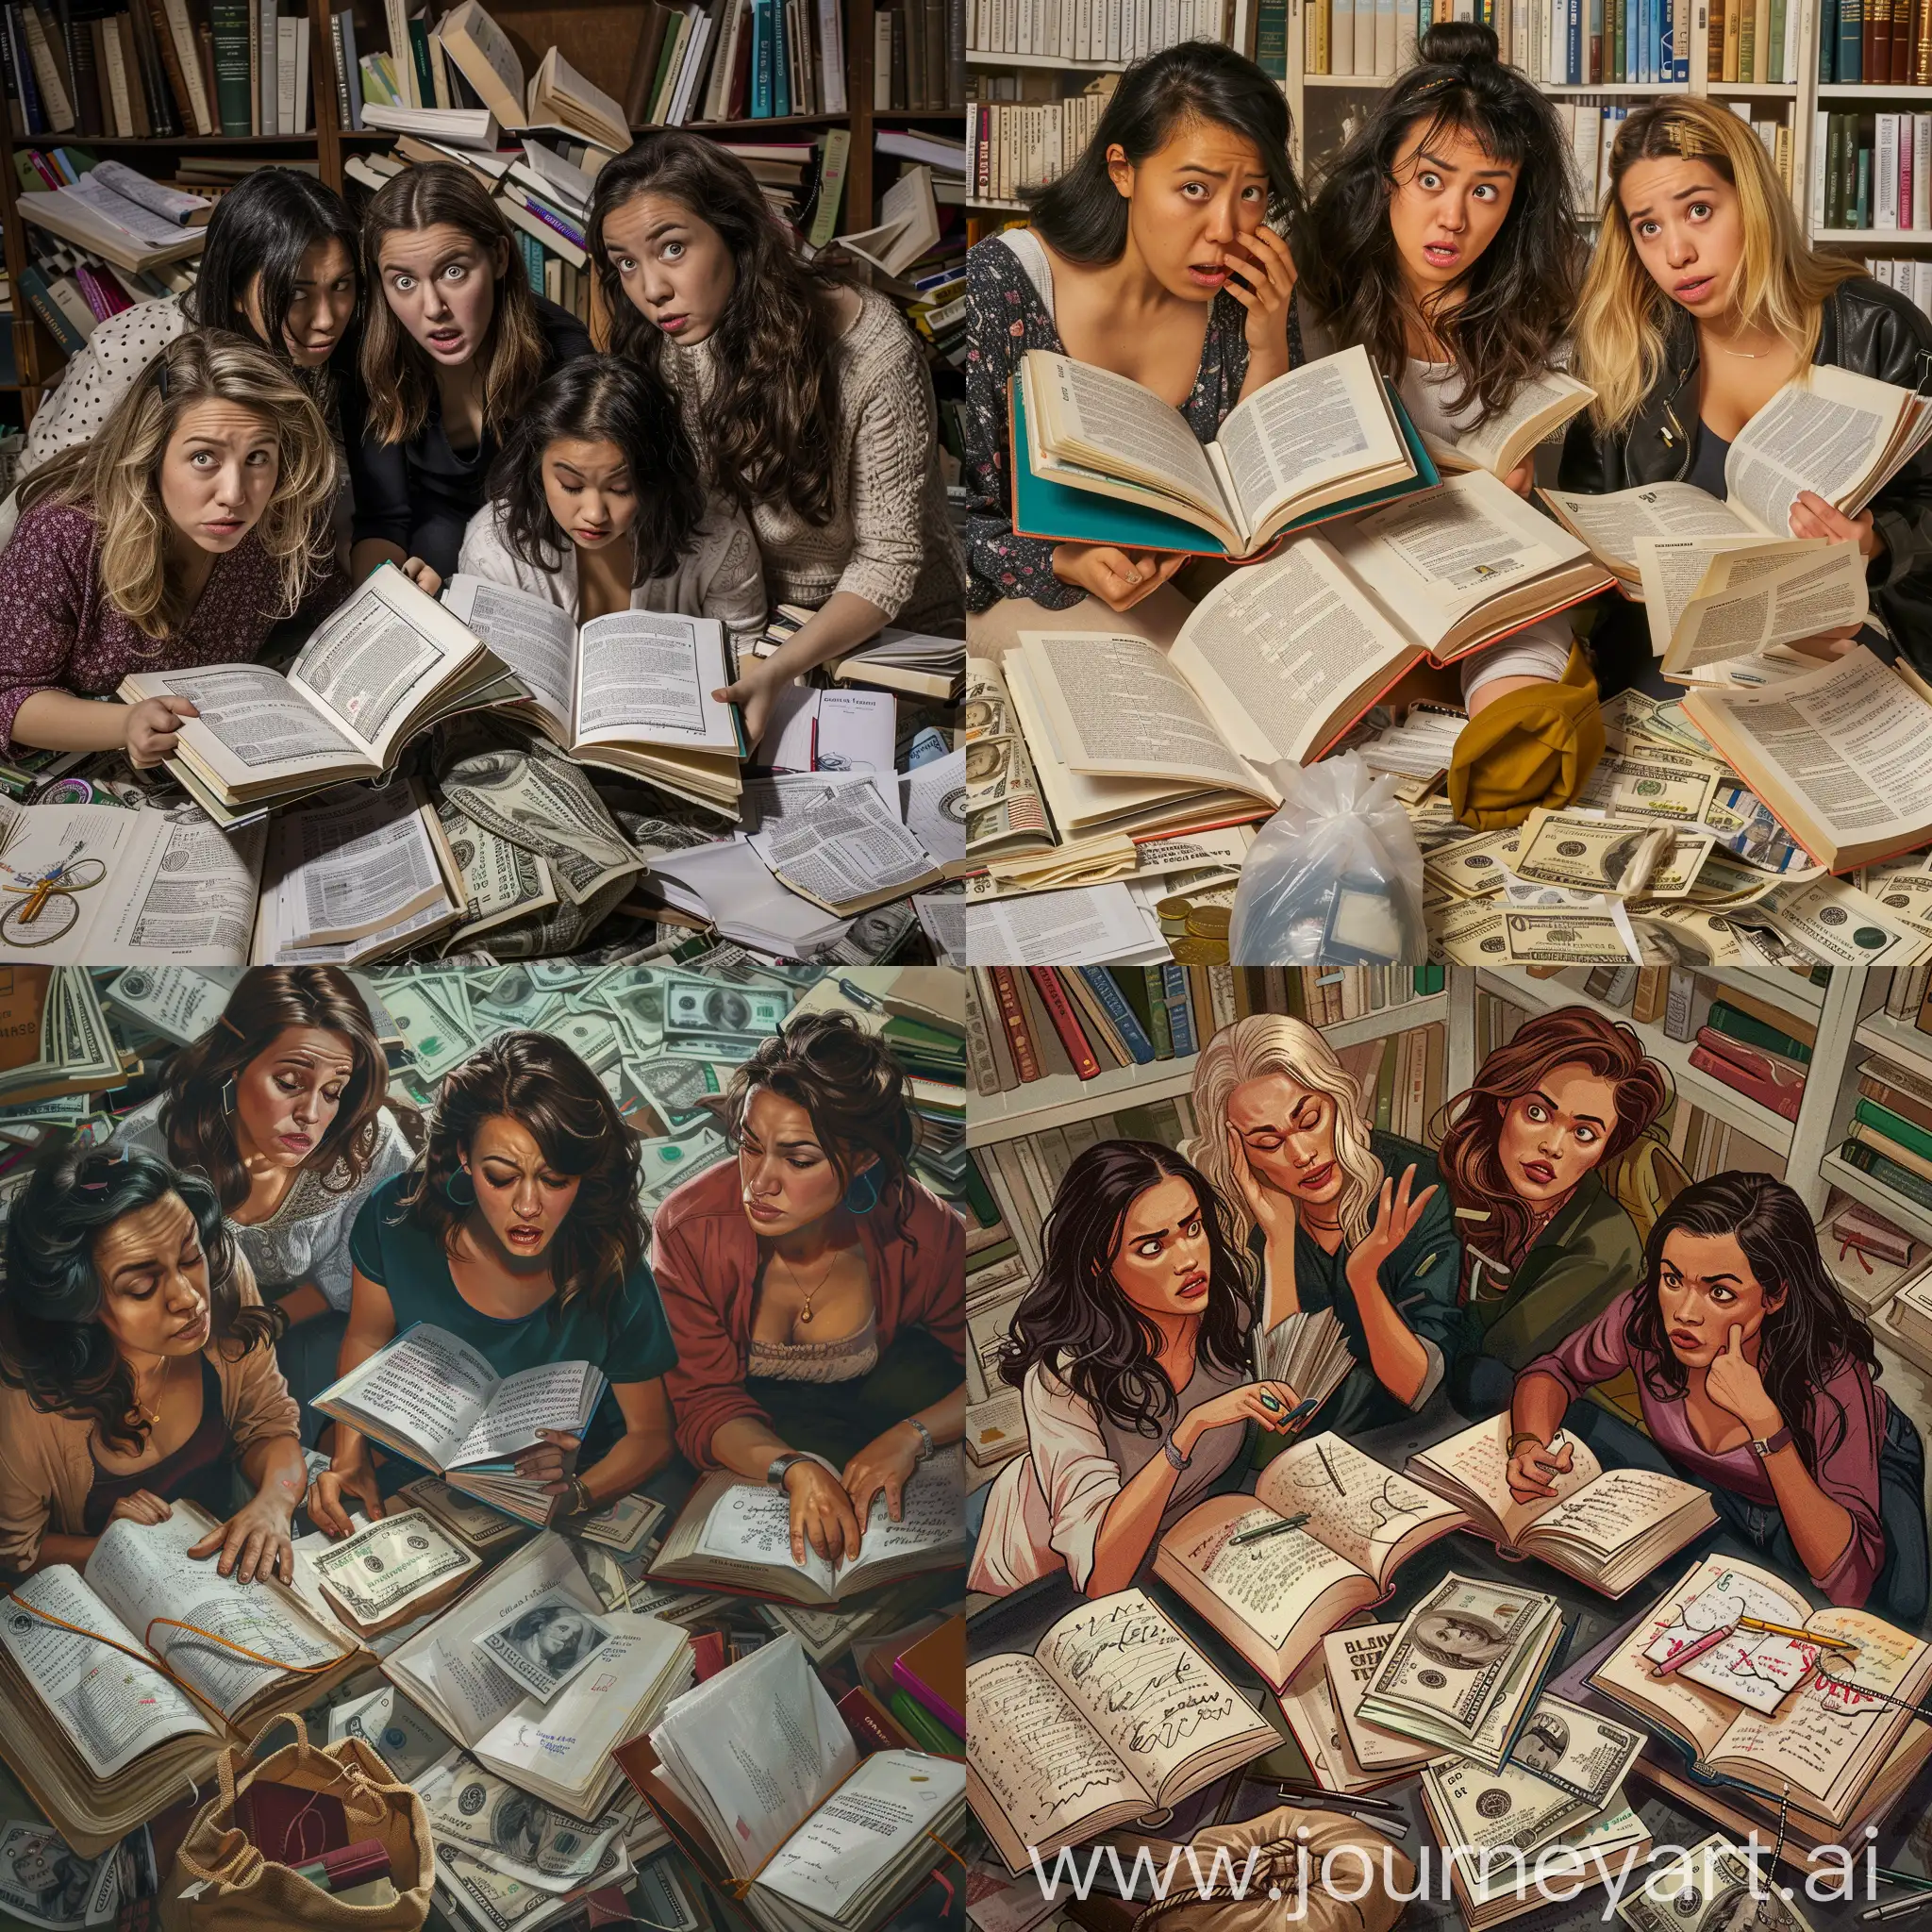 Four women, looking confused, pouring over books. They're in a messy room with journals and books open all over. There is  a money bag on the floor